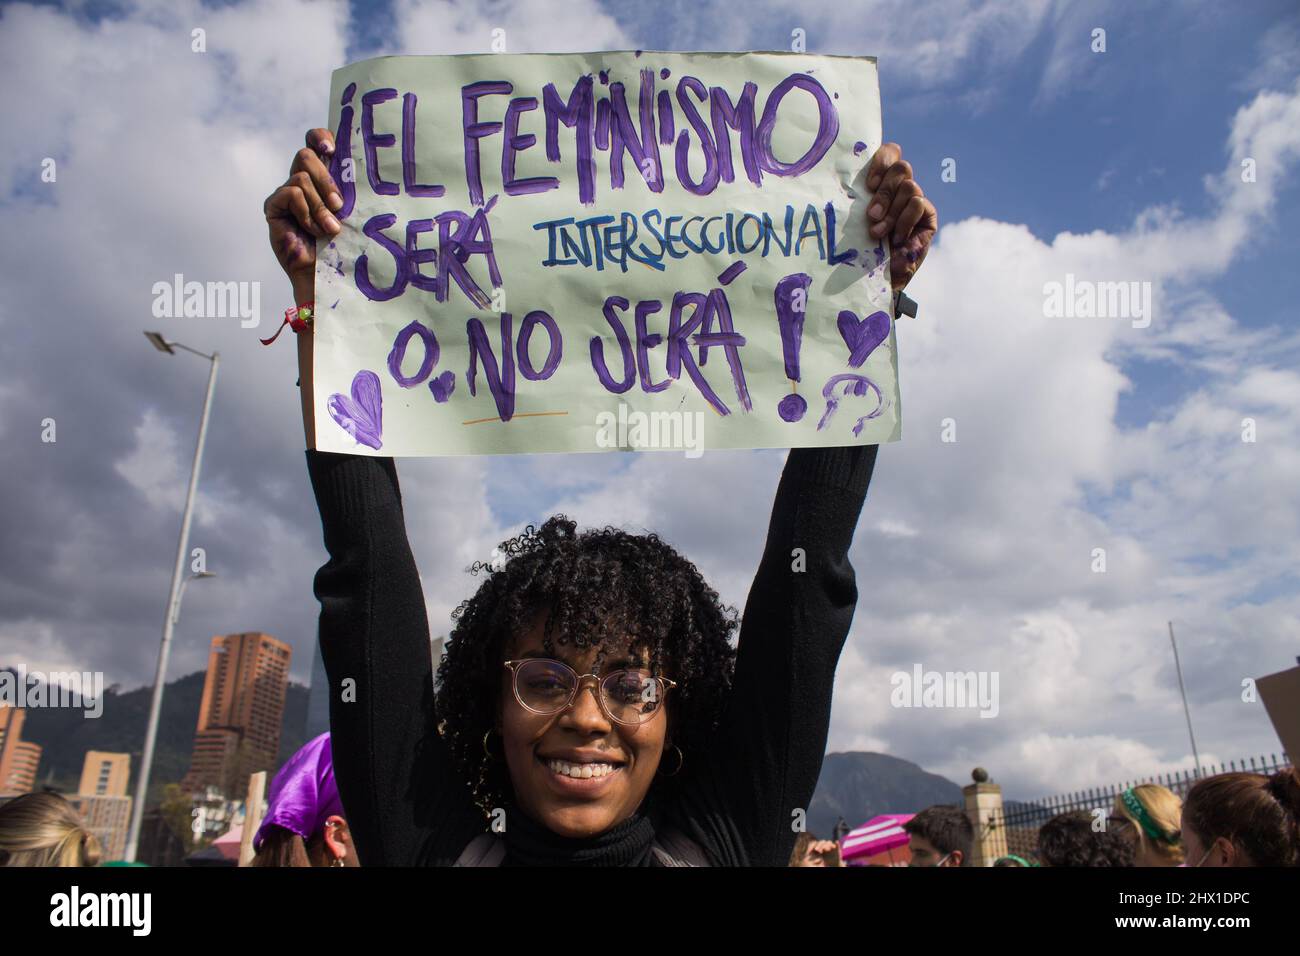 Bogota, Colombia on March 8, 2022. A demonstrator holds a pro-feminist sign as women participate in the international womes day demonstrations in Bogota, Colombia on March 8, 2022. Stock Photo